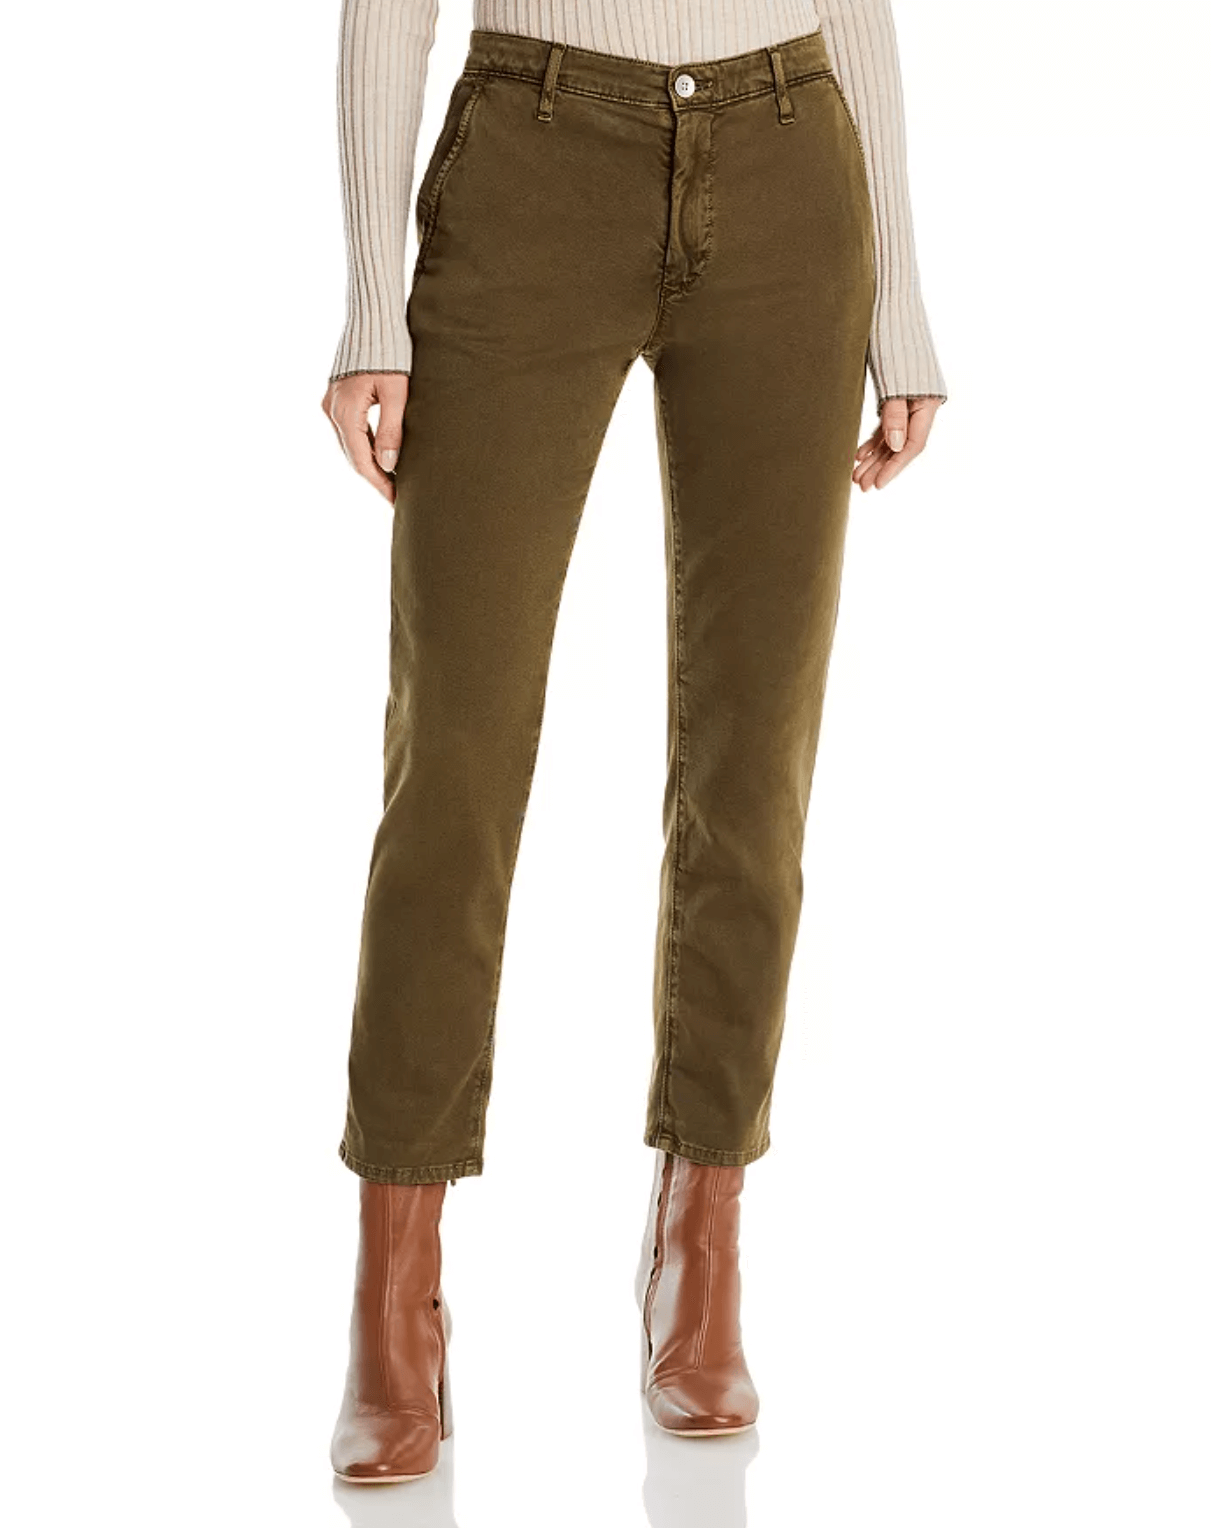 CADEN TAILORED TROUSER IN SULFUR SHADY MOSS